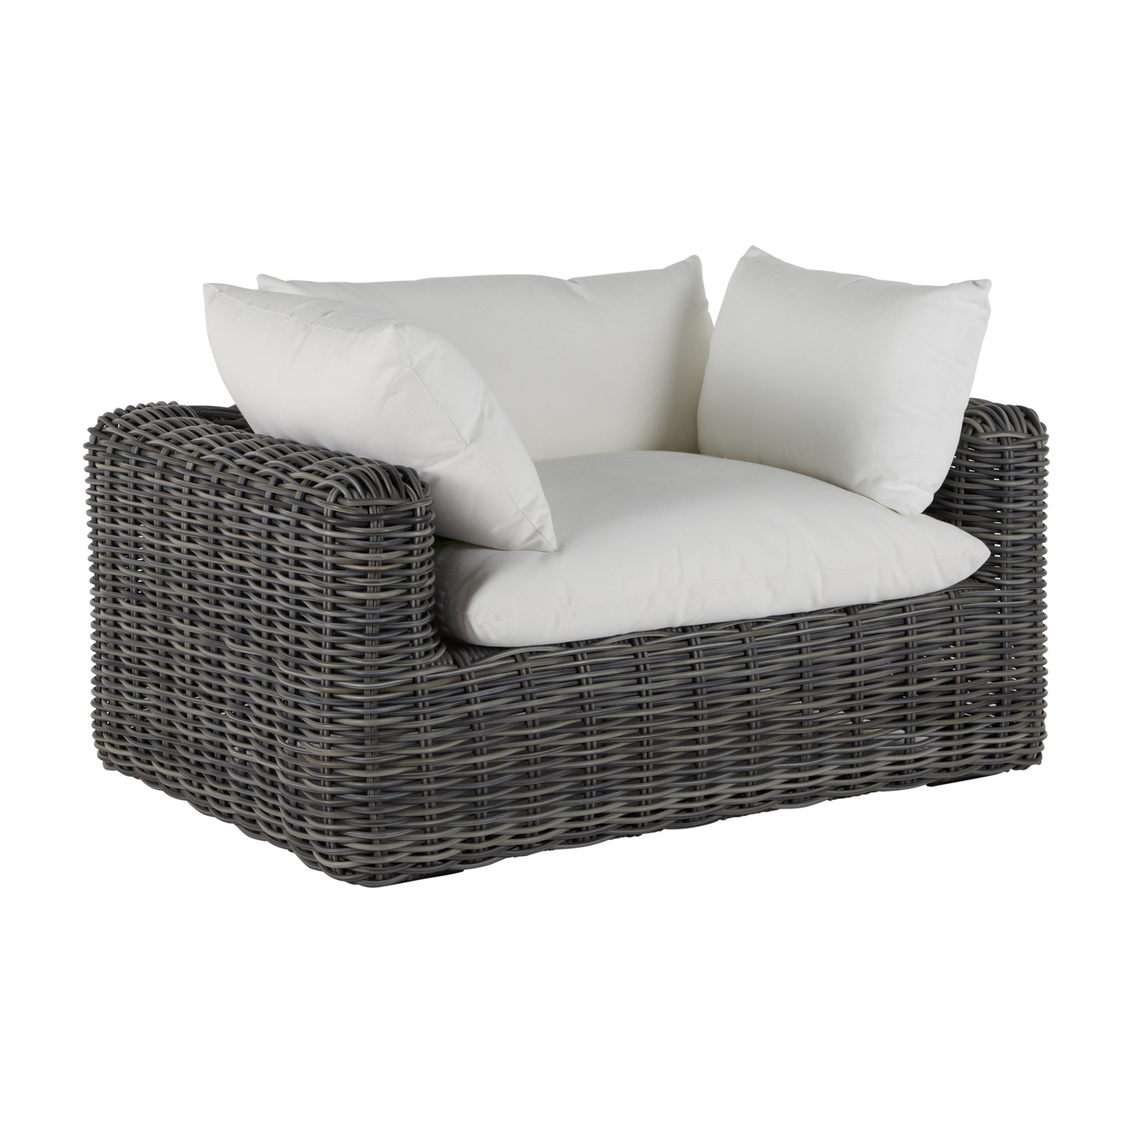 montecito woven lounge in slate grey – frame only product image